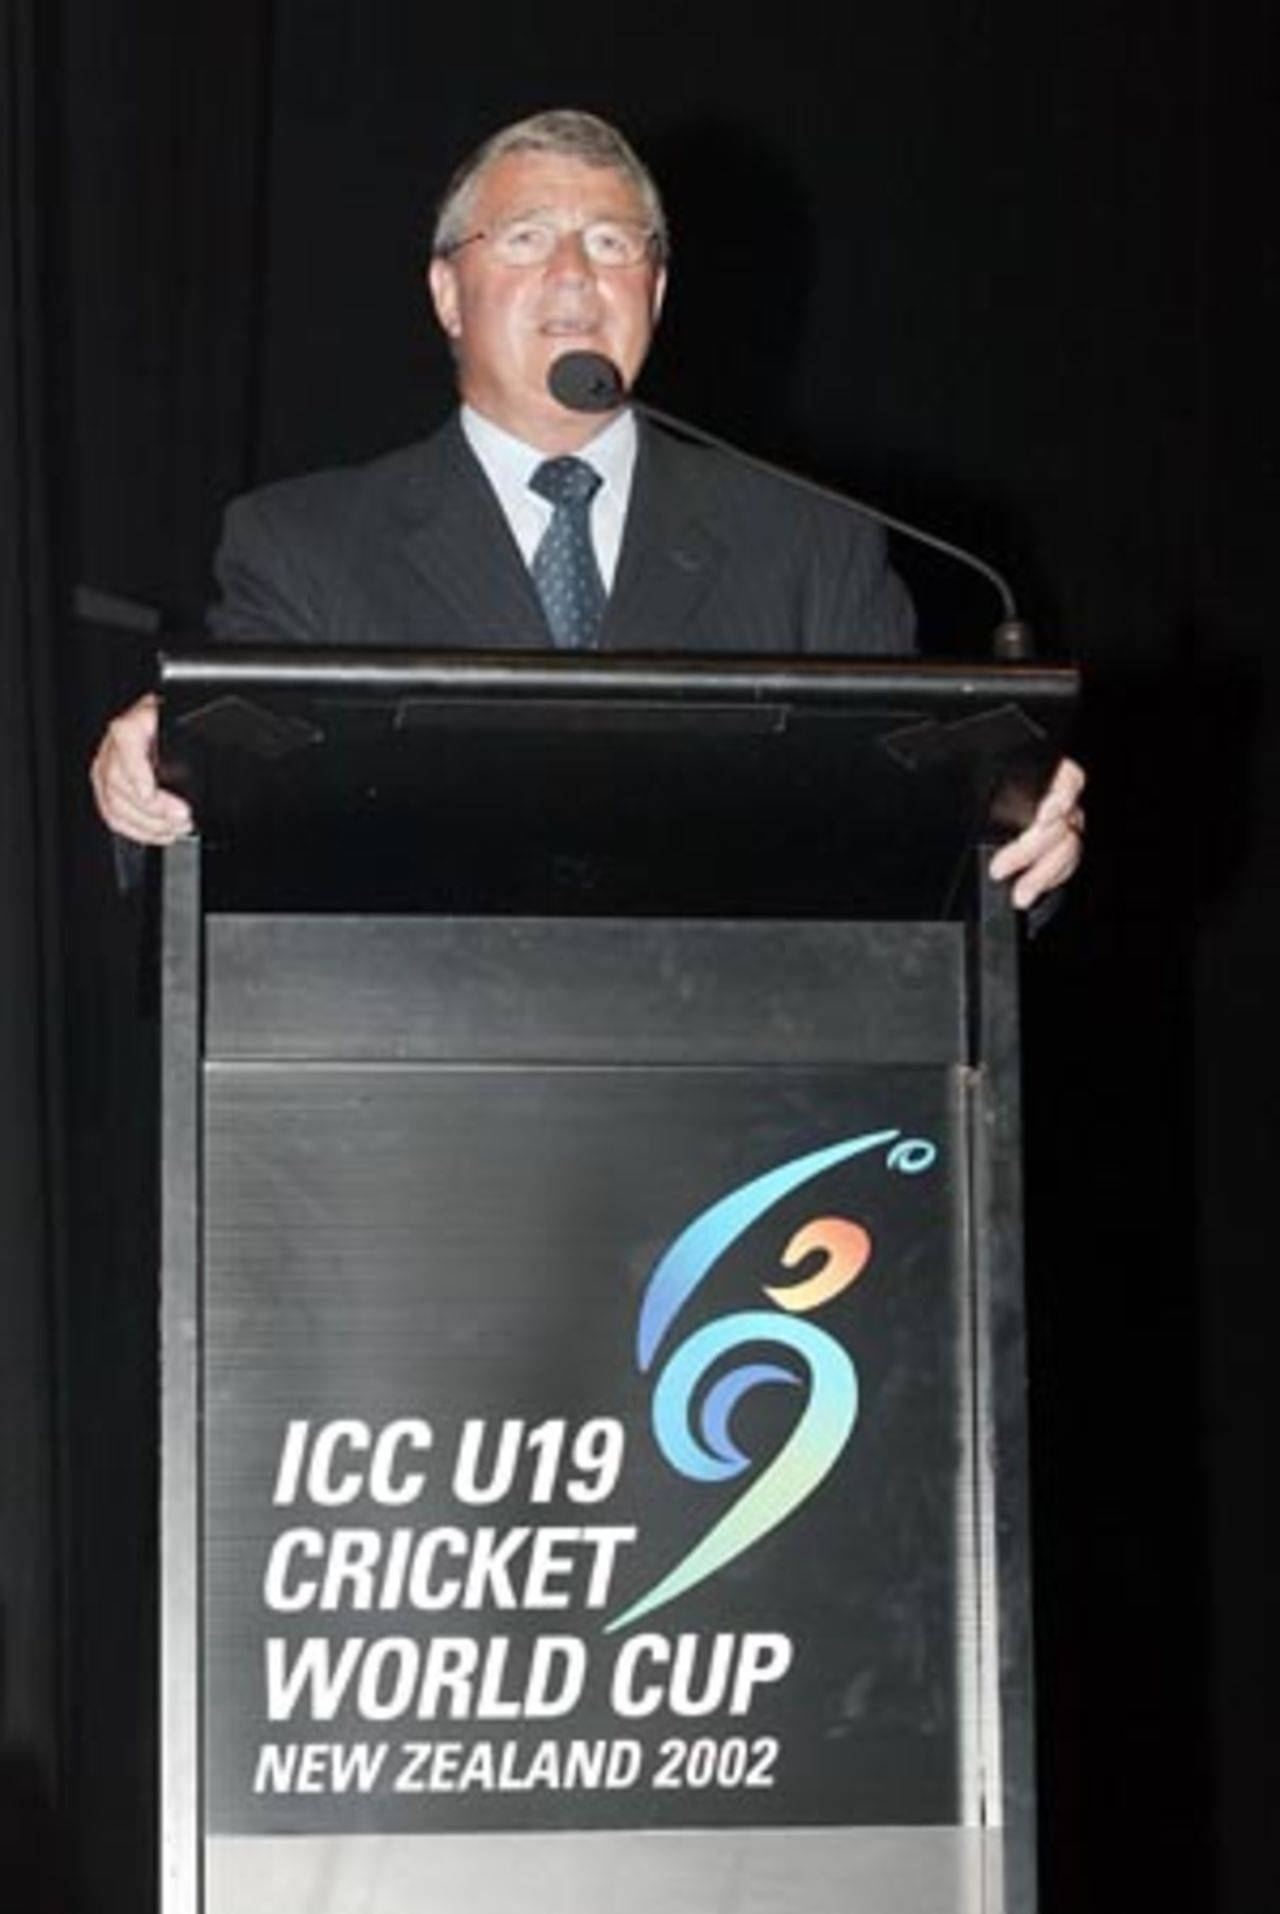 New Zealand deputy prime minister Jim Anderton delivers a speech at the ICC Under-19 World Cup opening ceremony at the Christchurch Convention Centre. 14 January 2002.